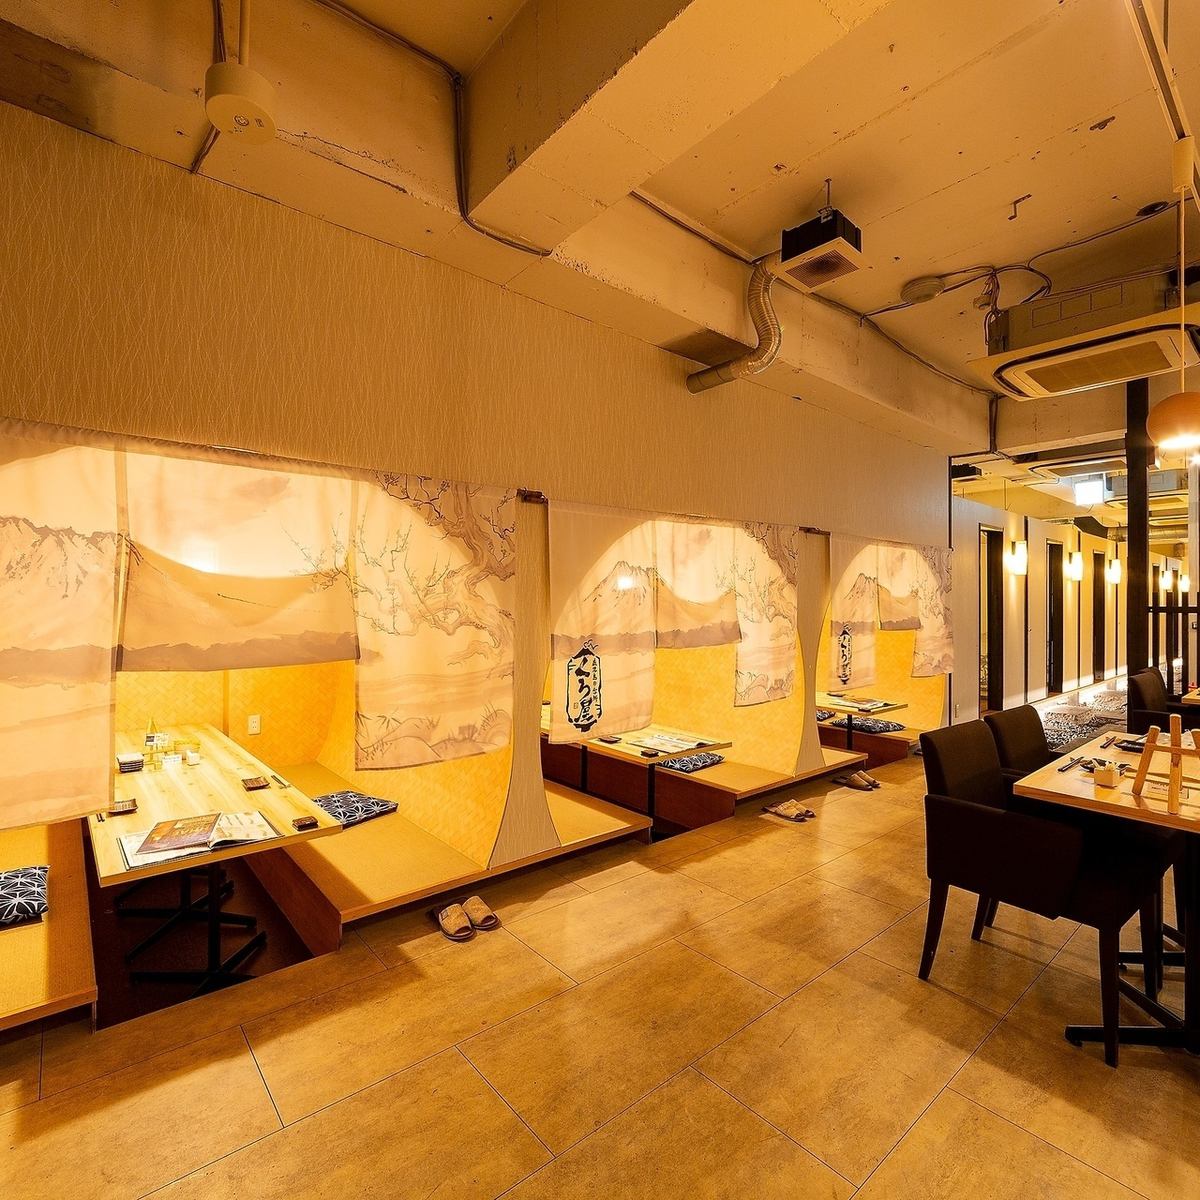 Enjoy Kagoshima's local cuisine and local sake in a completely private room... A hideout for adults